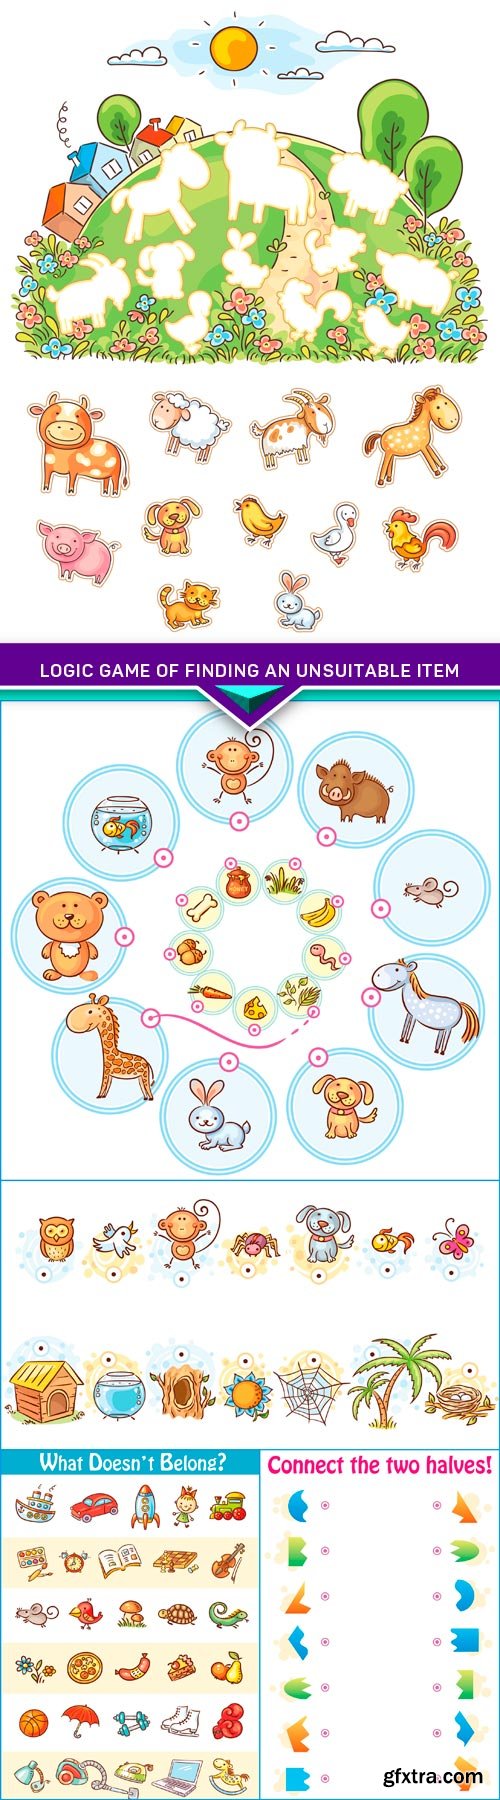 Logic game of finding an unsuitable item 5X EPS